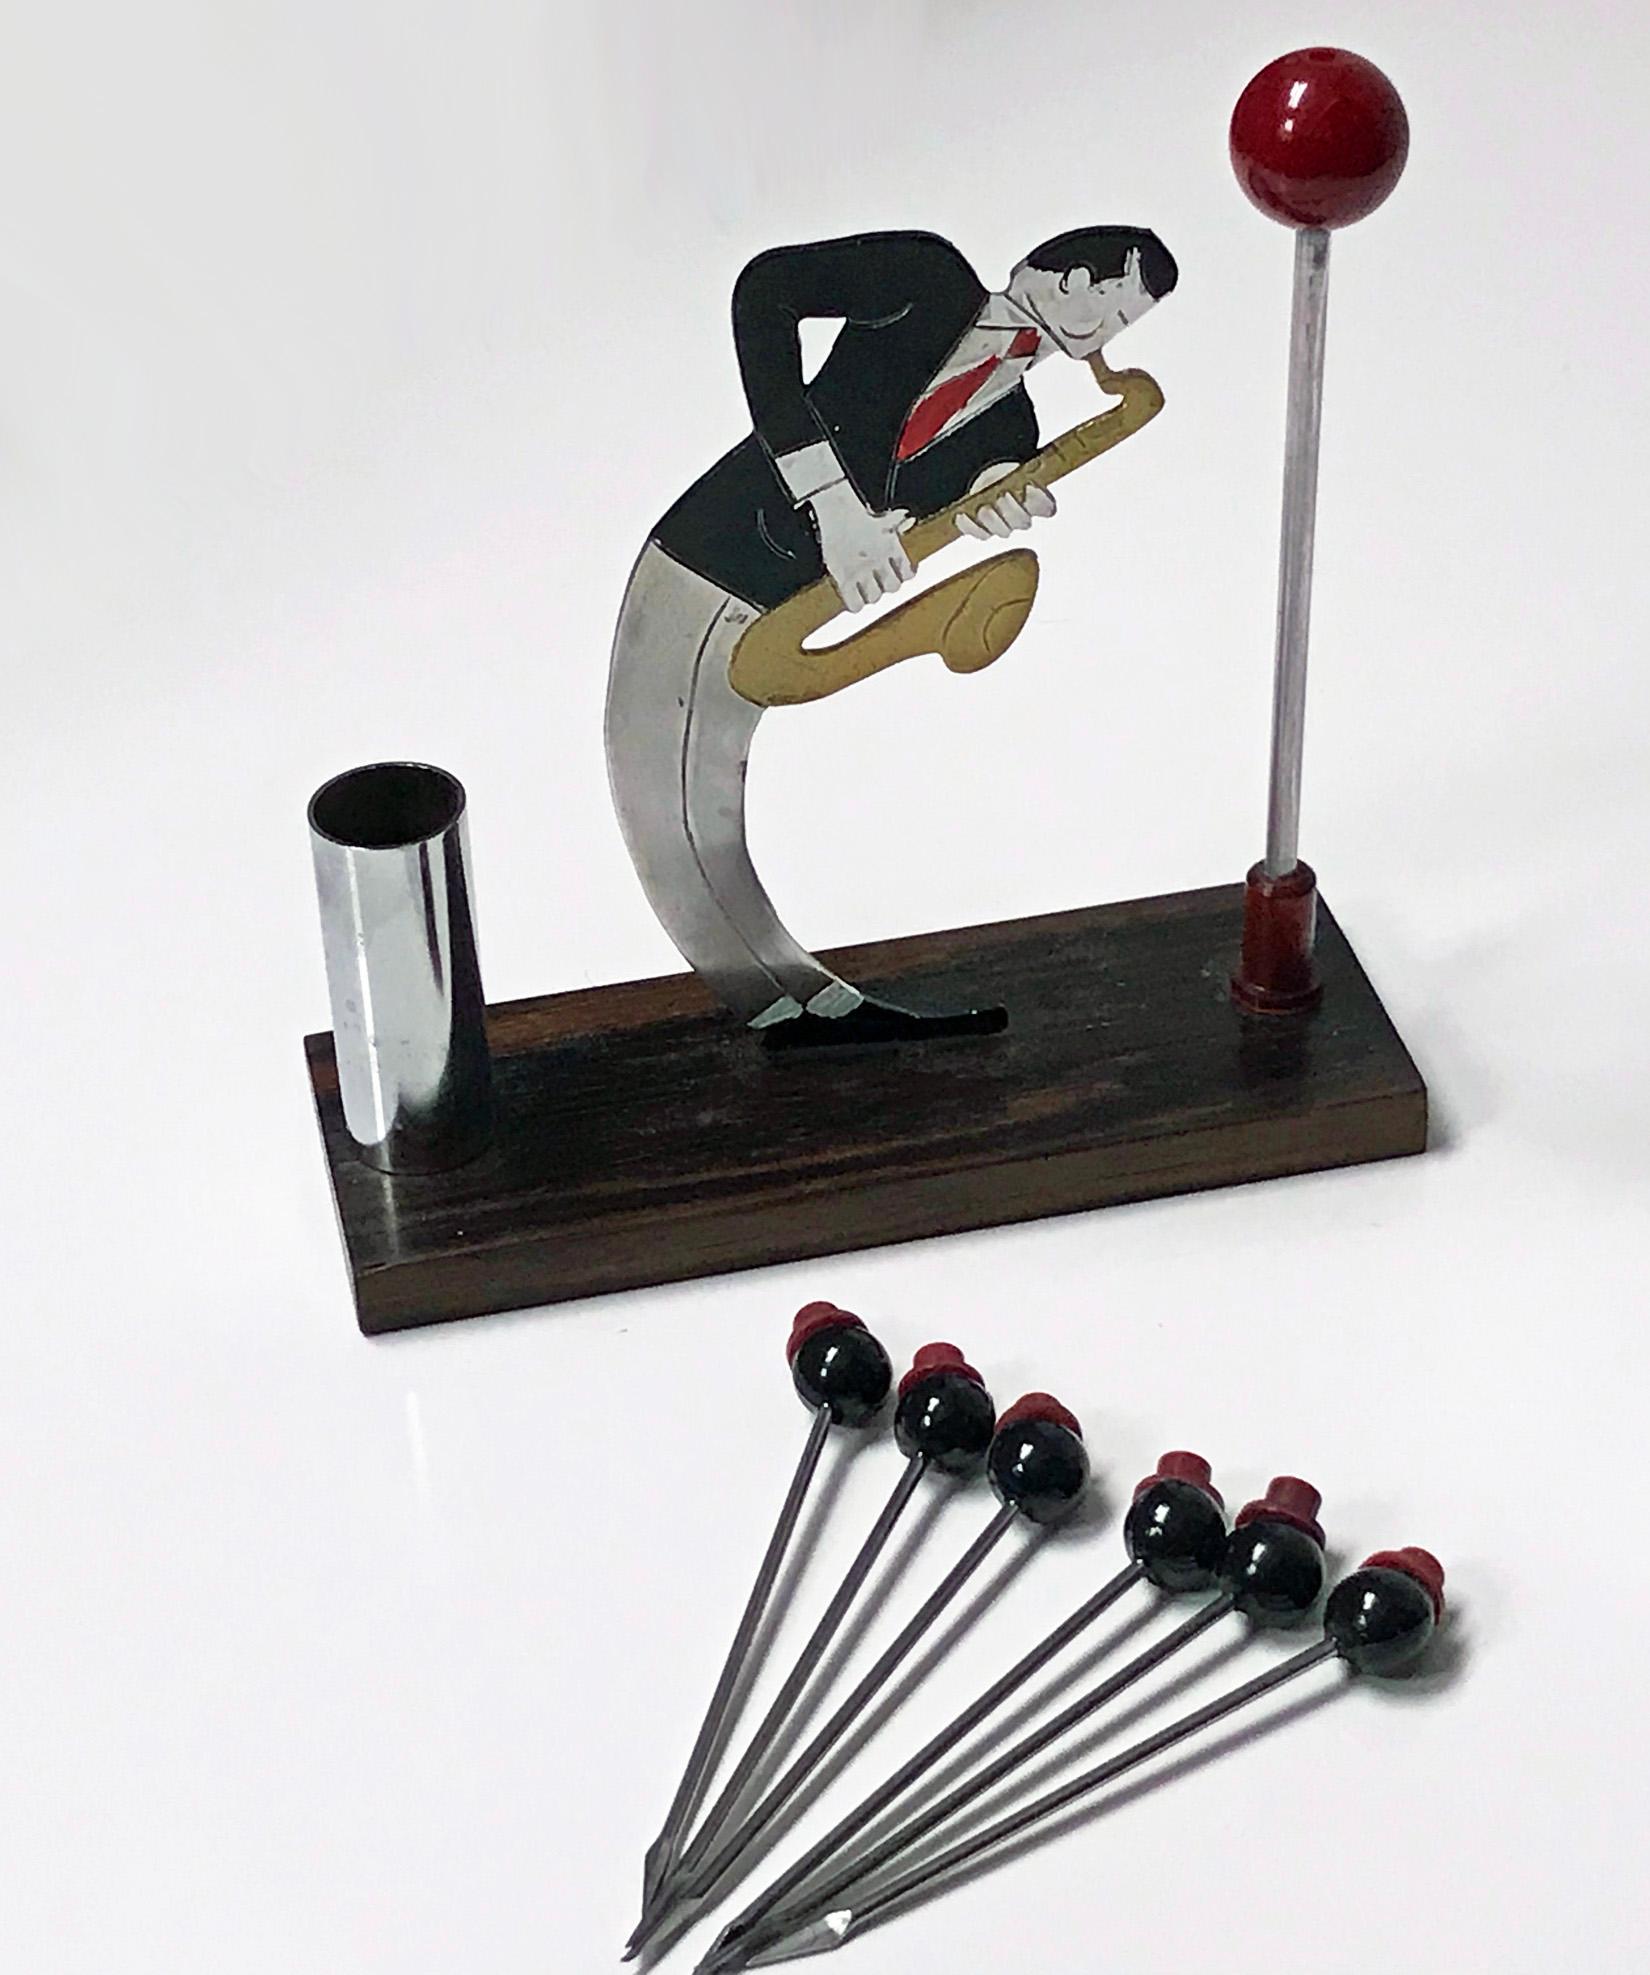 Rare French Art Deco Jazz musician bar cocktail sticks set, probably by Sudre, circa 1920. All mounted on a wood base. The jazz musician playing saxophone, 6 cocktail picks in the form of top hats. Measures: 5.25 x 1.90 x 5.0 inches.